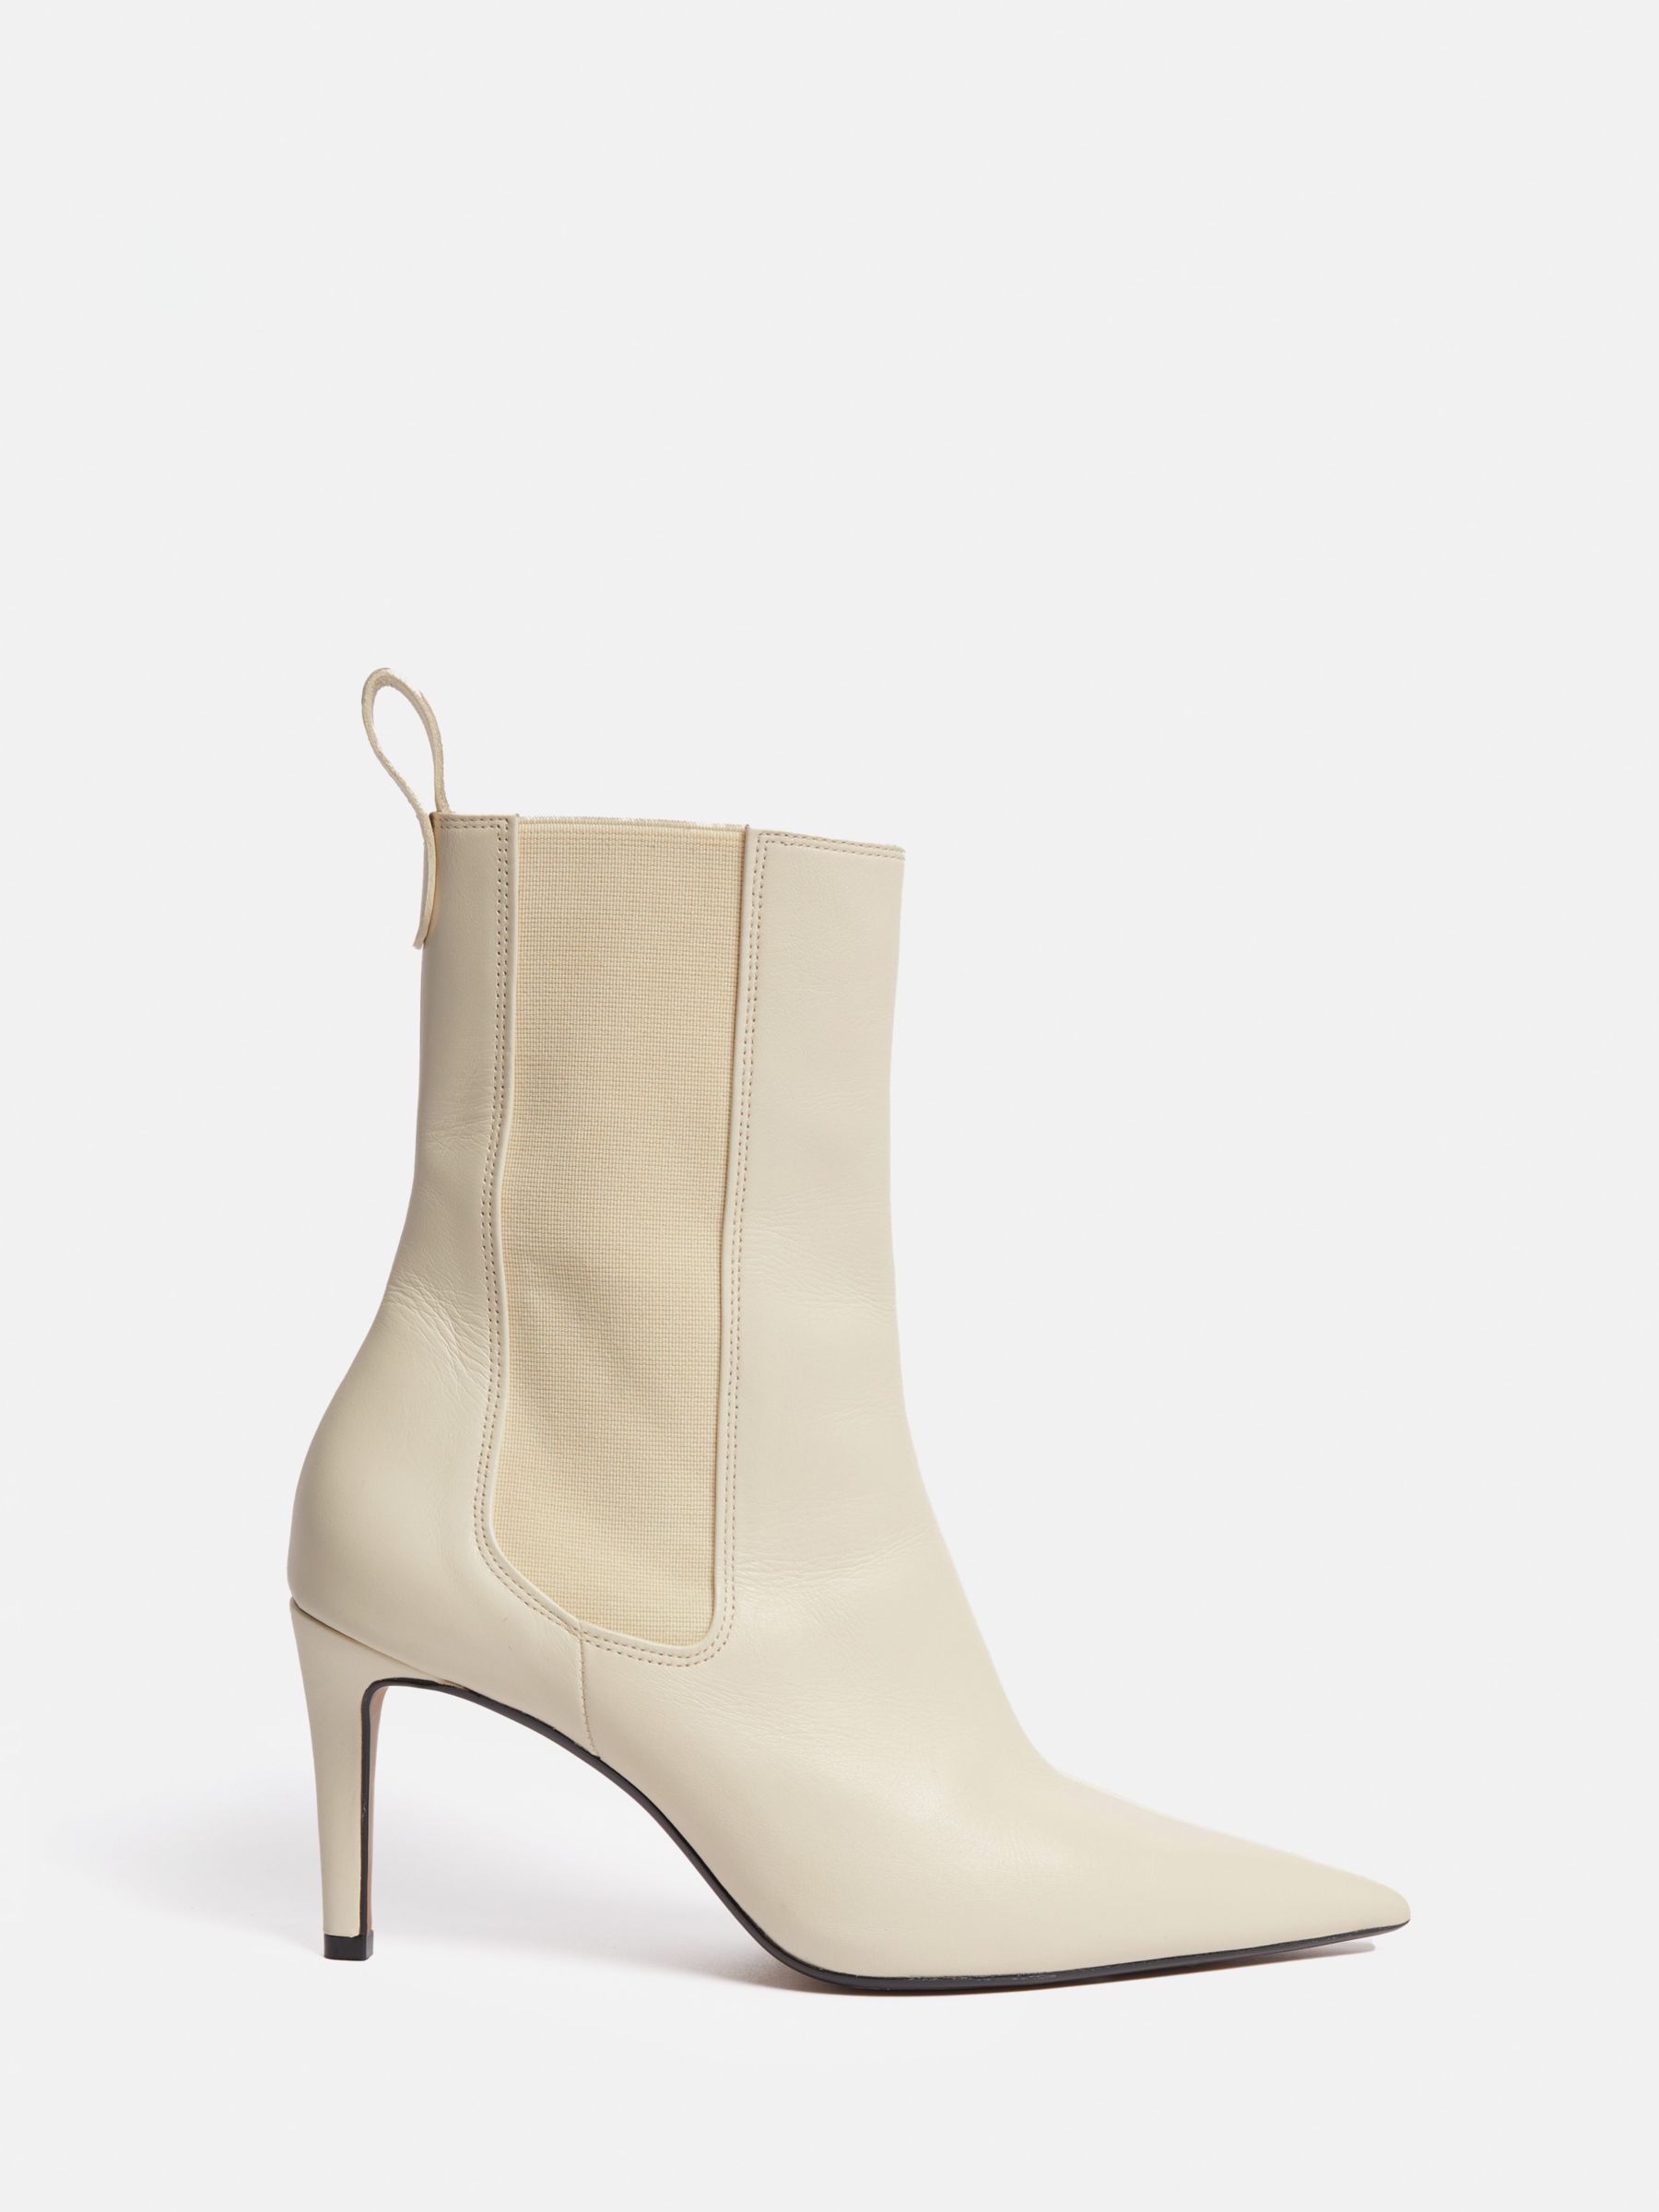 Jigsaw Skelter Pull-On Leather Ankle Boots, Cream, EU36